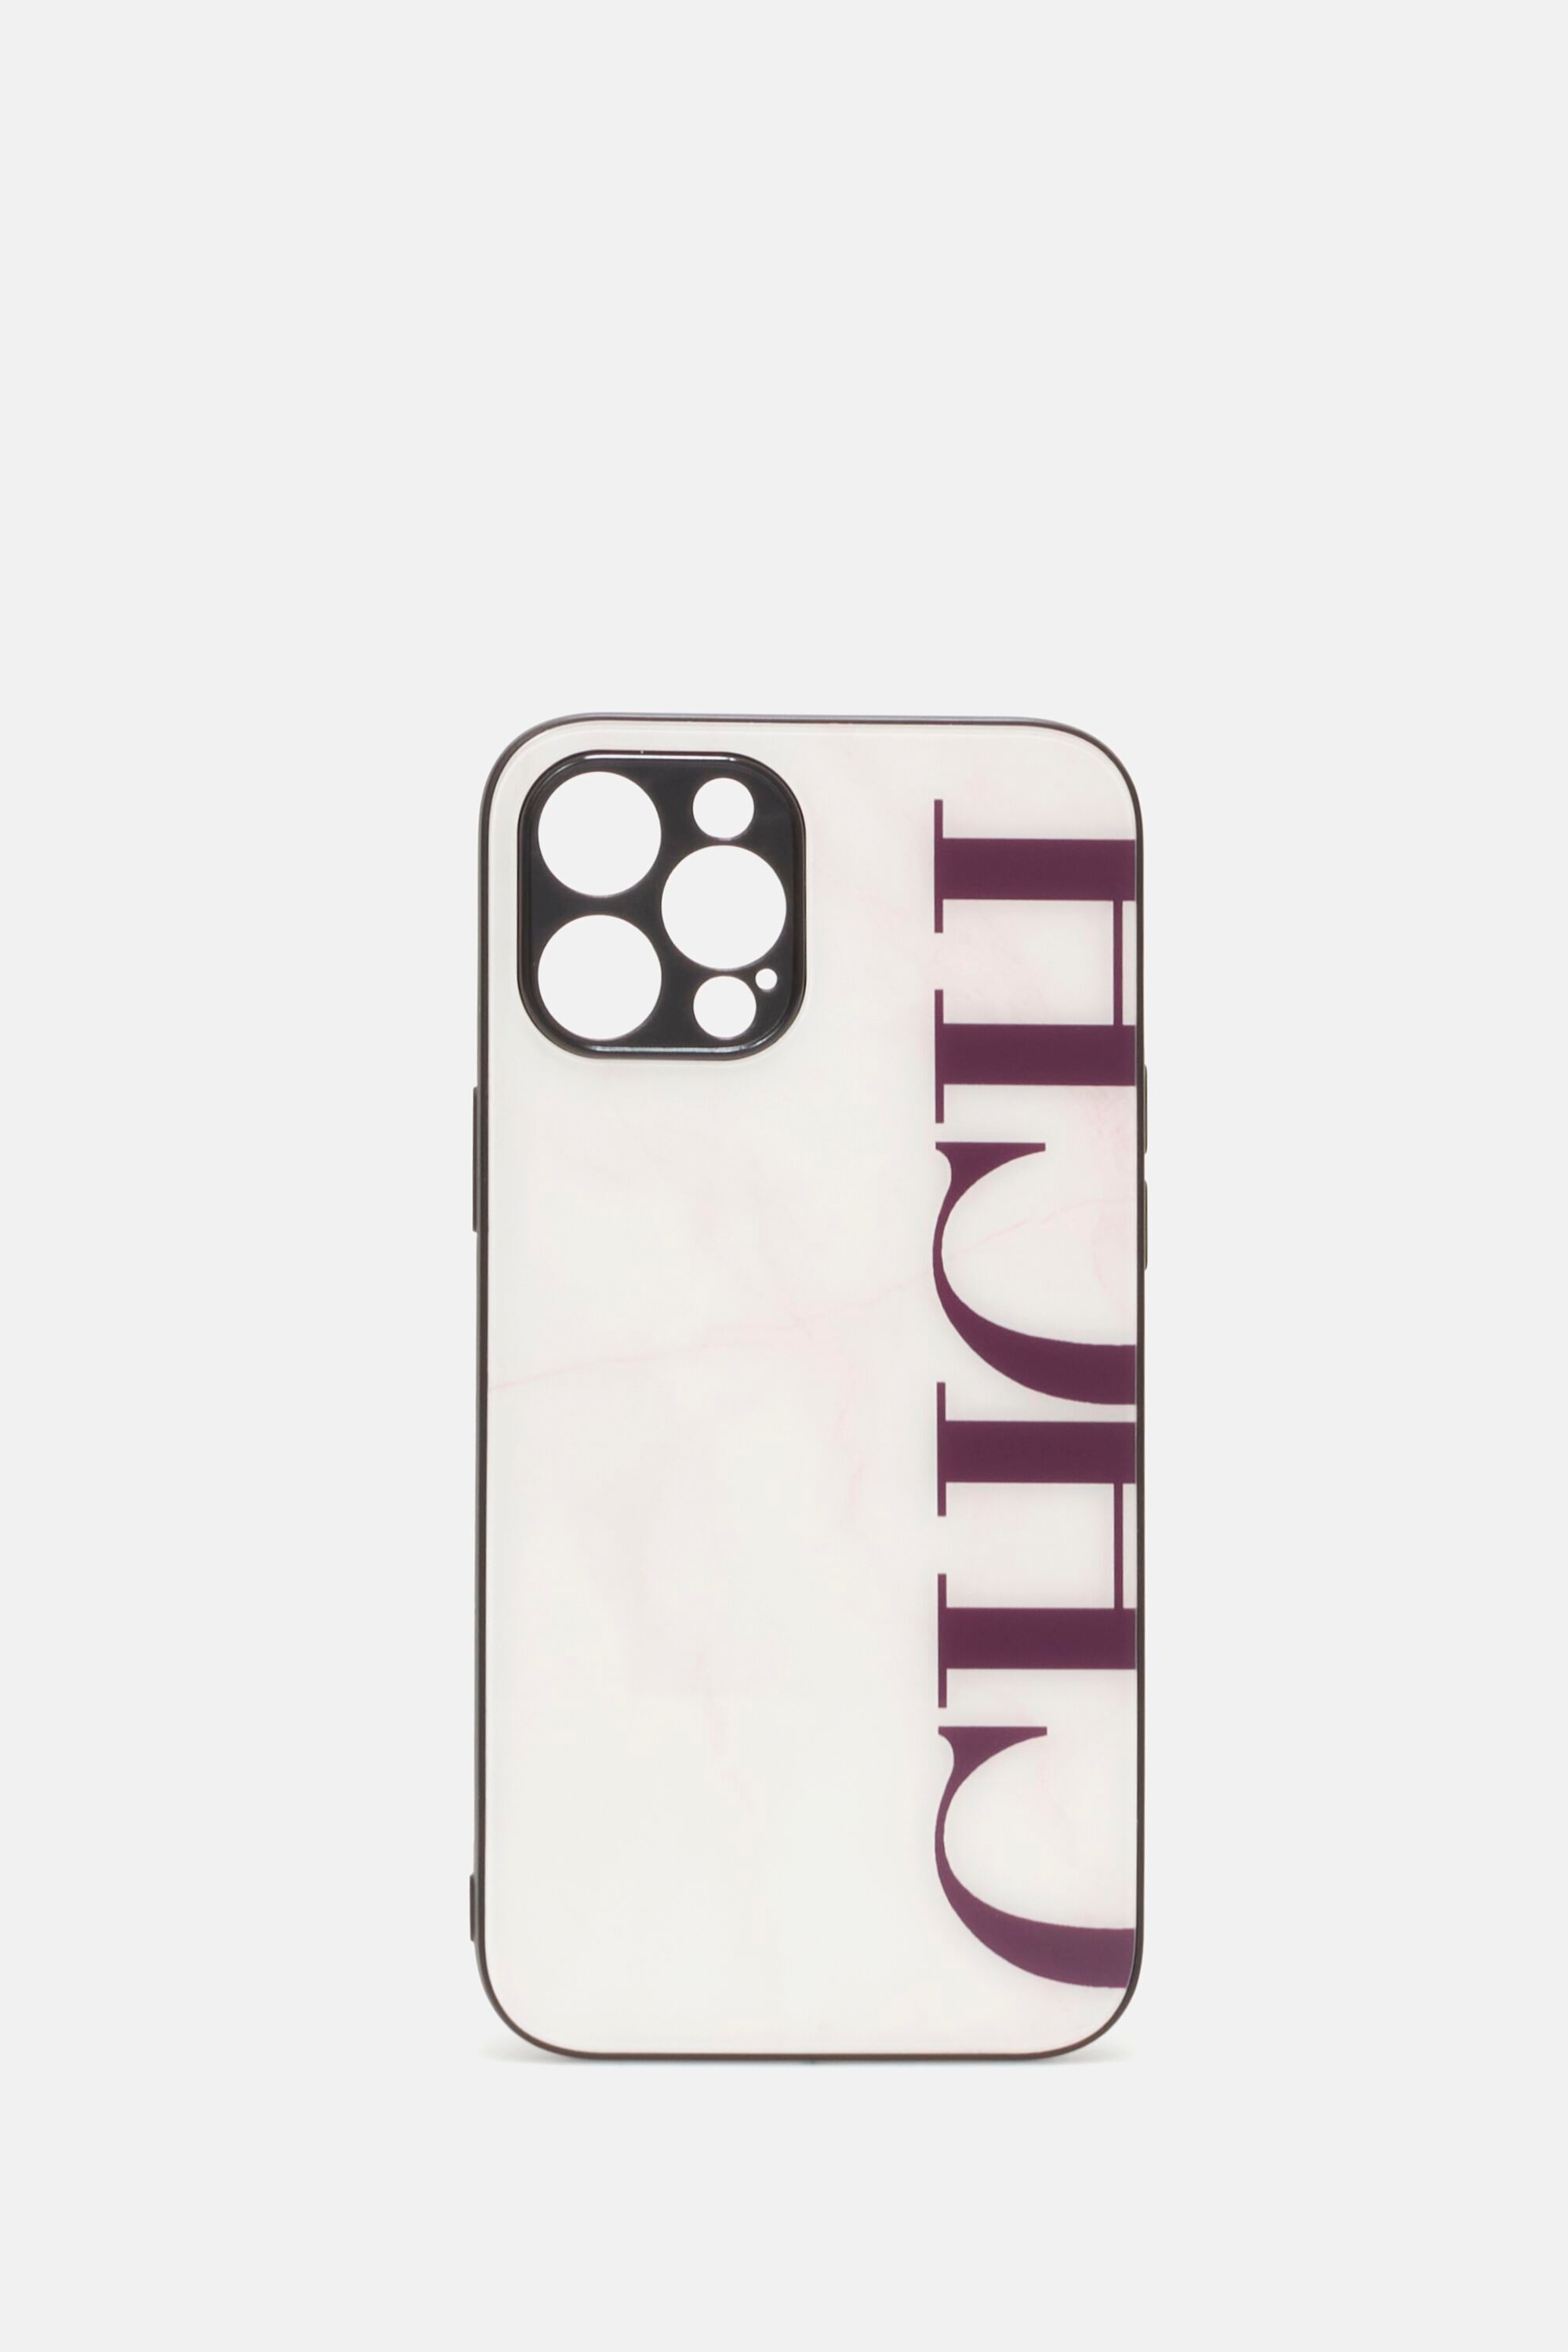 CHHC | iPhone 12 Pro Max case